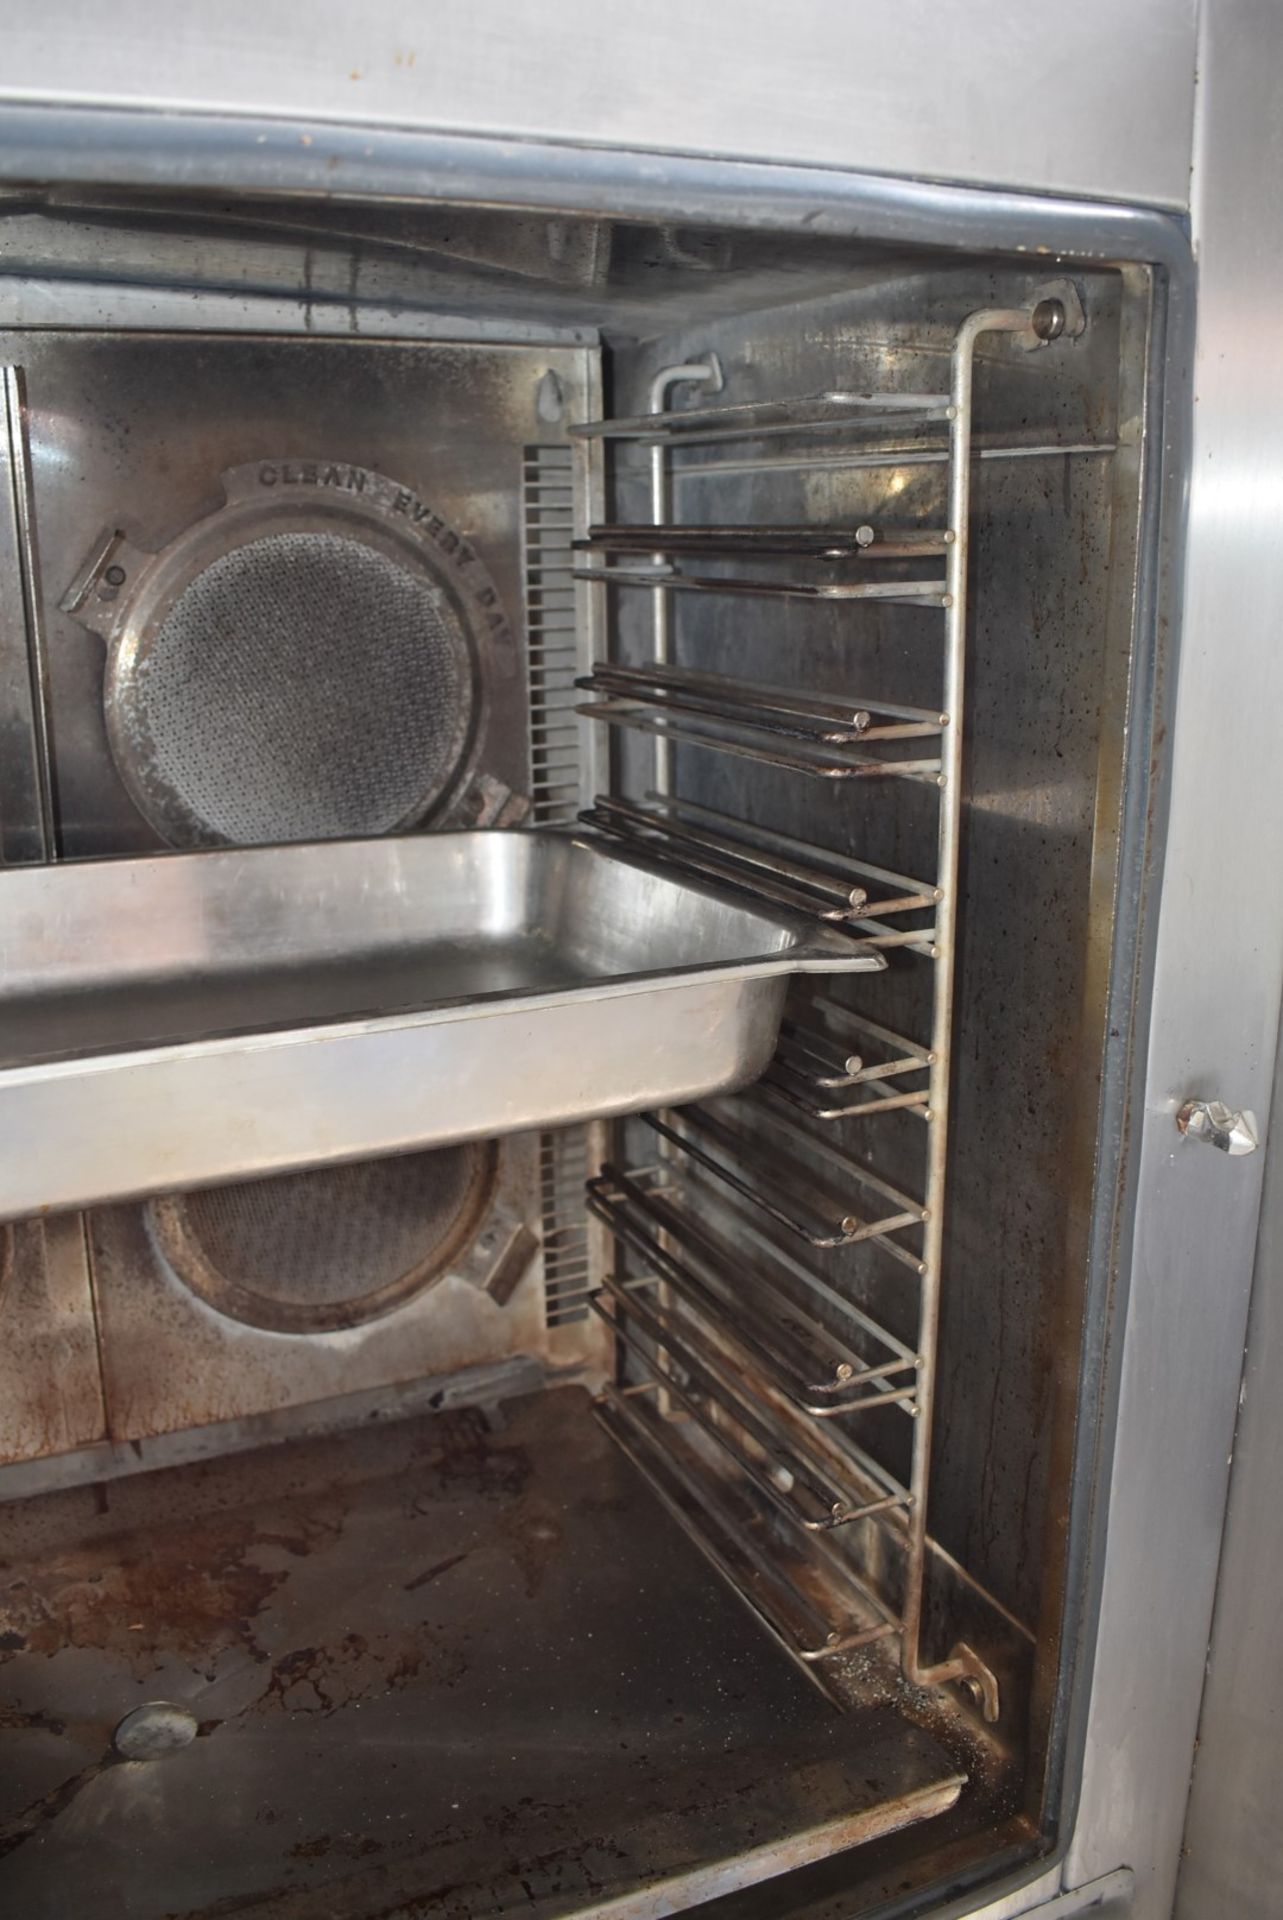 1 x Fri-Jado Turbo Retail 8 Grid Combi Oven - 3 Phase Combi Oven With Various Cooking Programs - Image 22 of 24